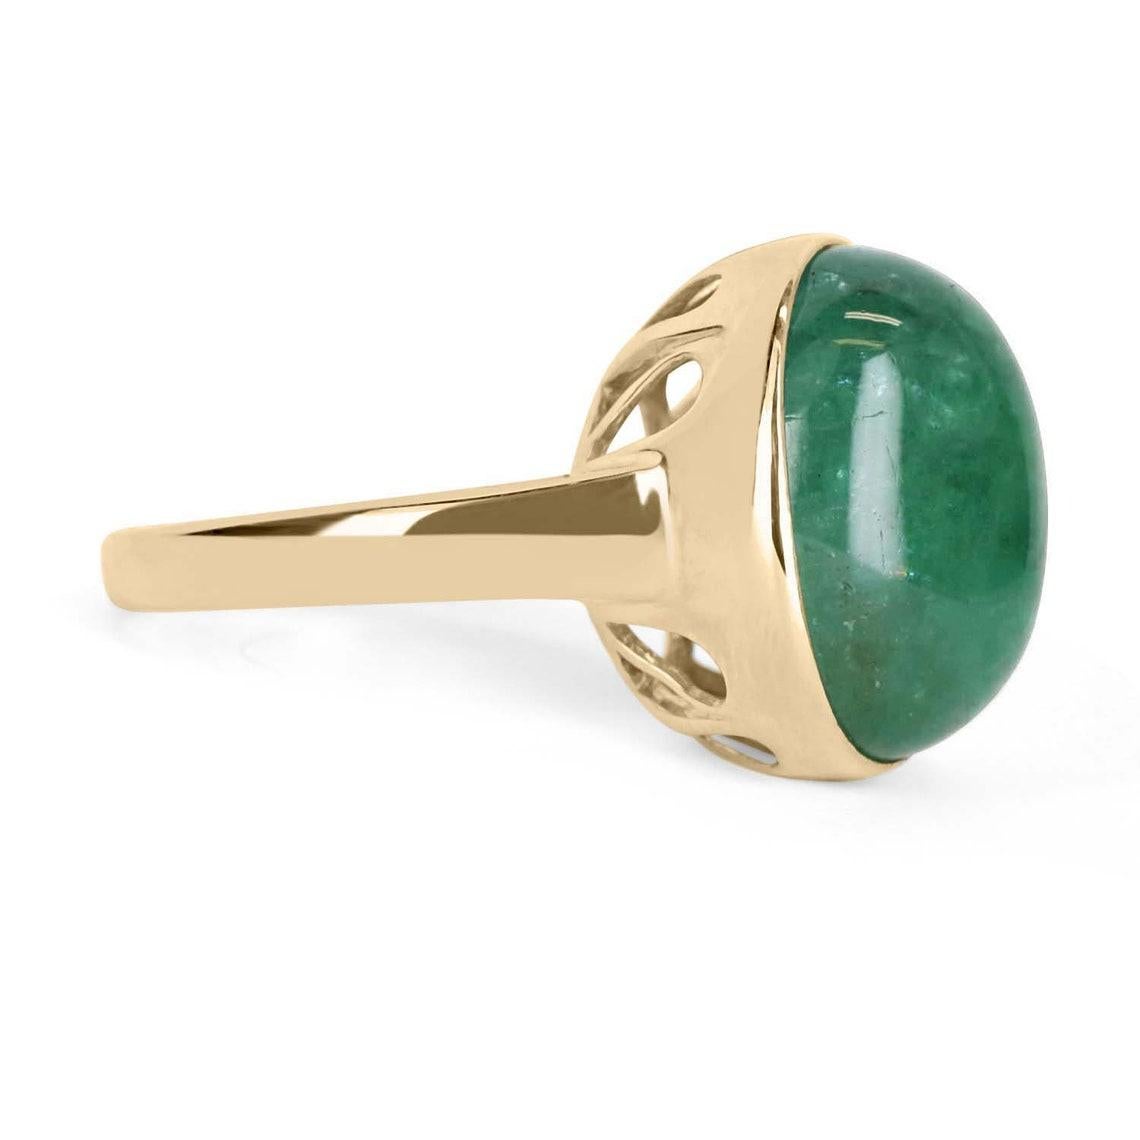 Displayed is a cabochon Colombian emerald solitaire ring in 14K yellow gold. This gorgeous solitaire ring carries a full 16.37-carat emerald in a secure bezel setting. The emerald is translucent and showcases a gorgeous green color. A one of a kind